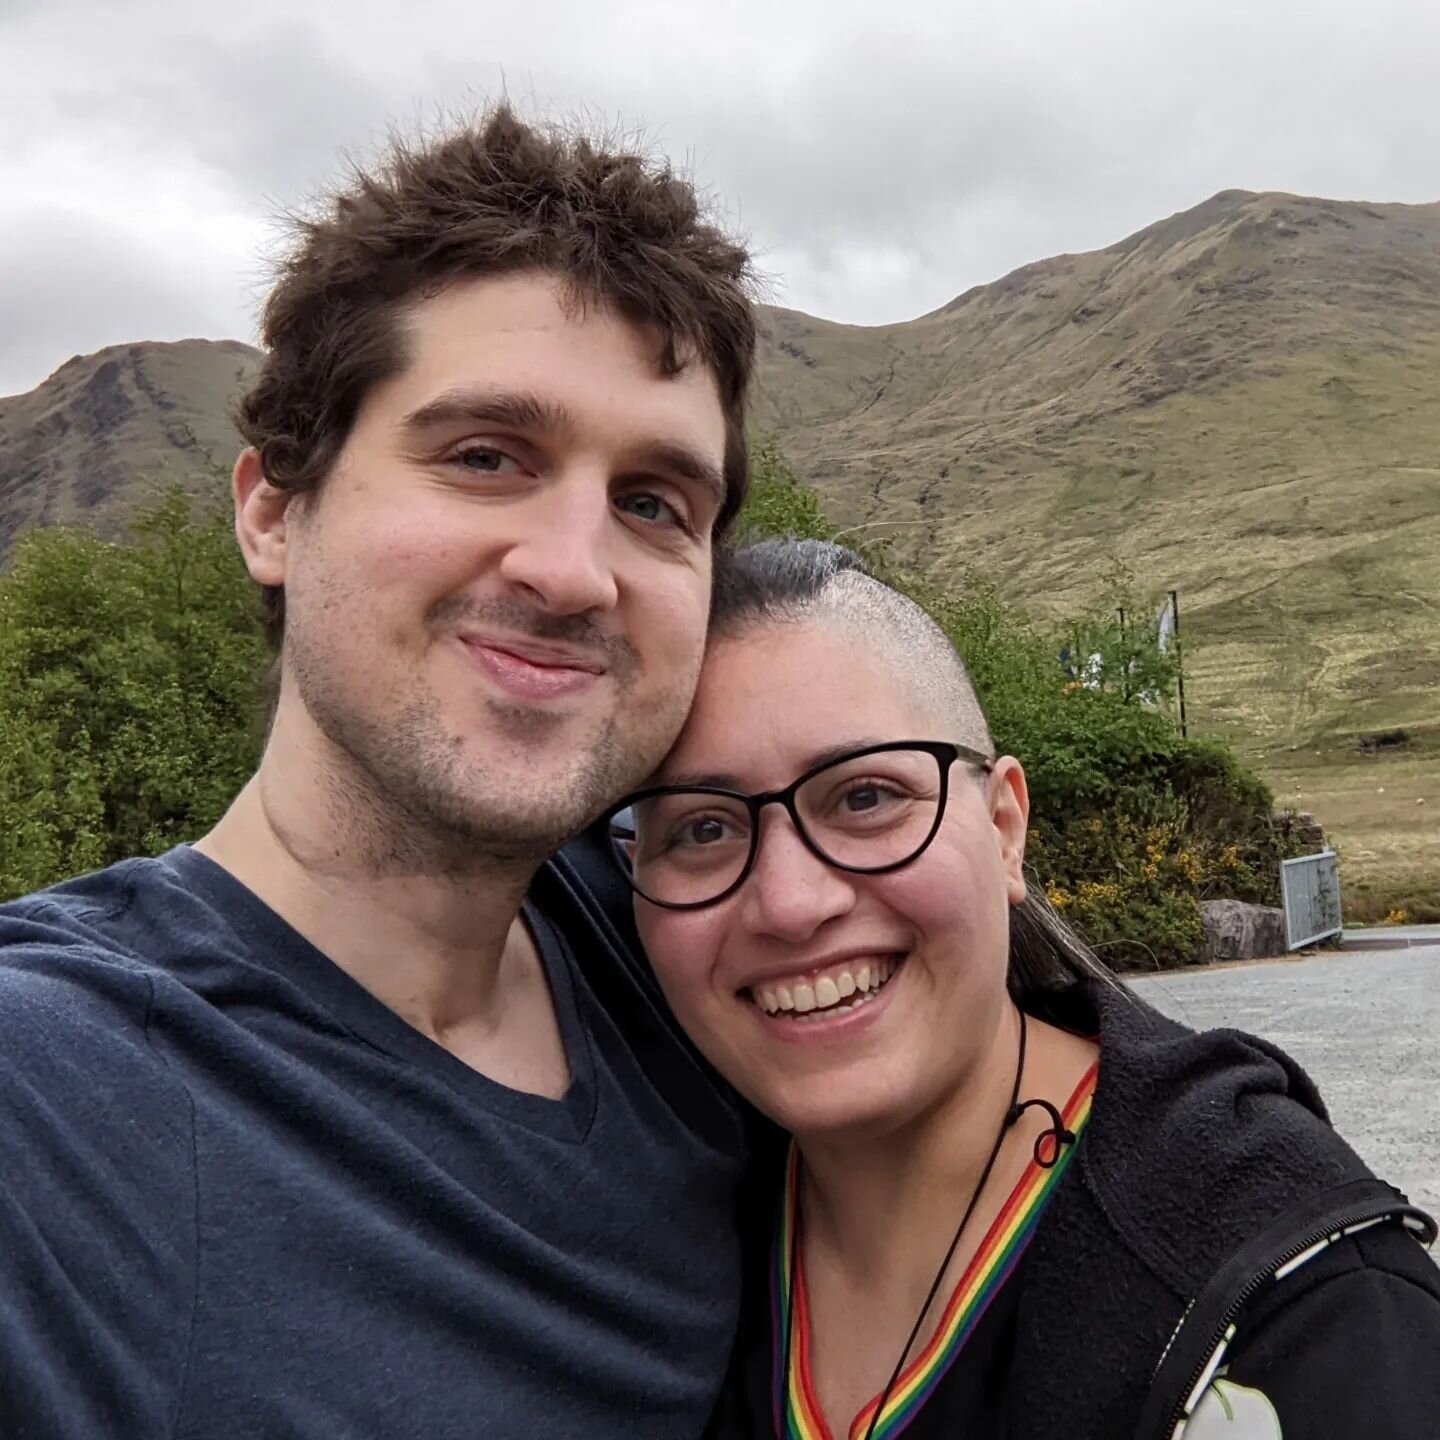 In May we took our first real vacation together ever. It was a lovely way to celebrate our 10-year anniversary! 💖 We spent a week at a yoga &amp; meditation retreat in Ireland with some of the best people ever (thank you @true_nature_travels, @being